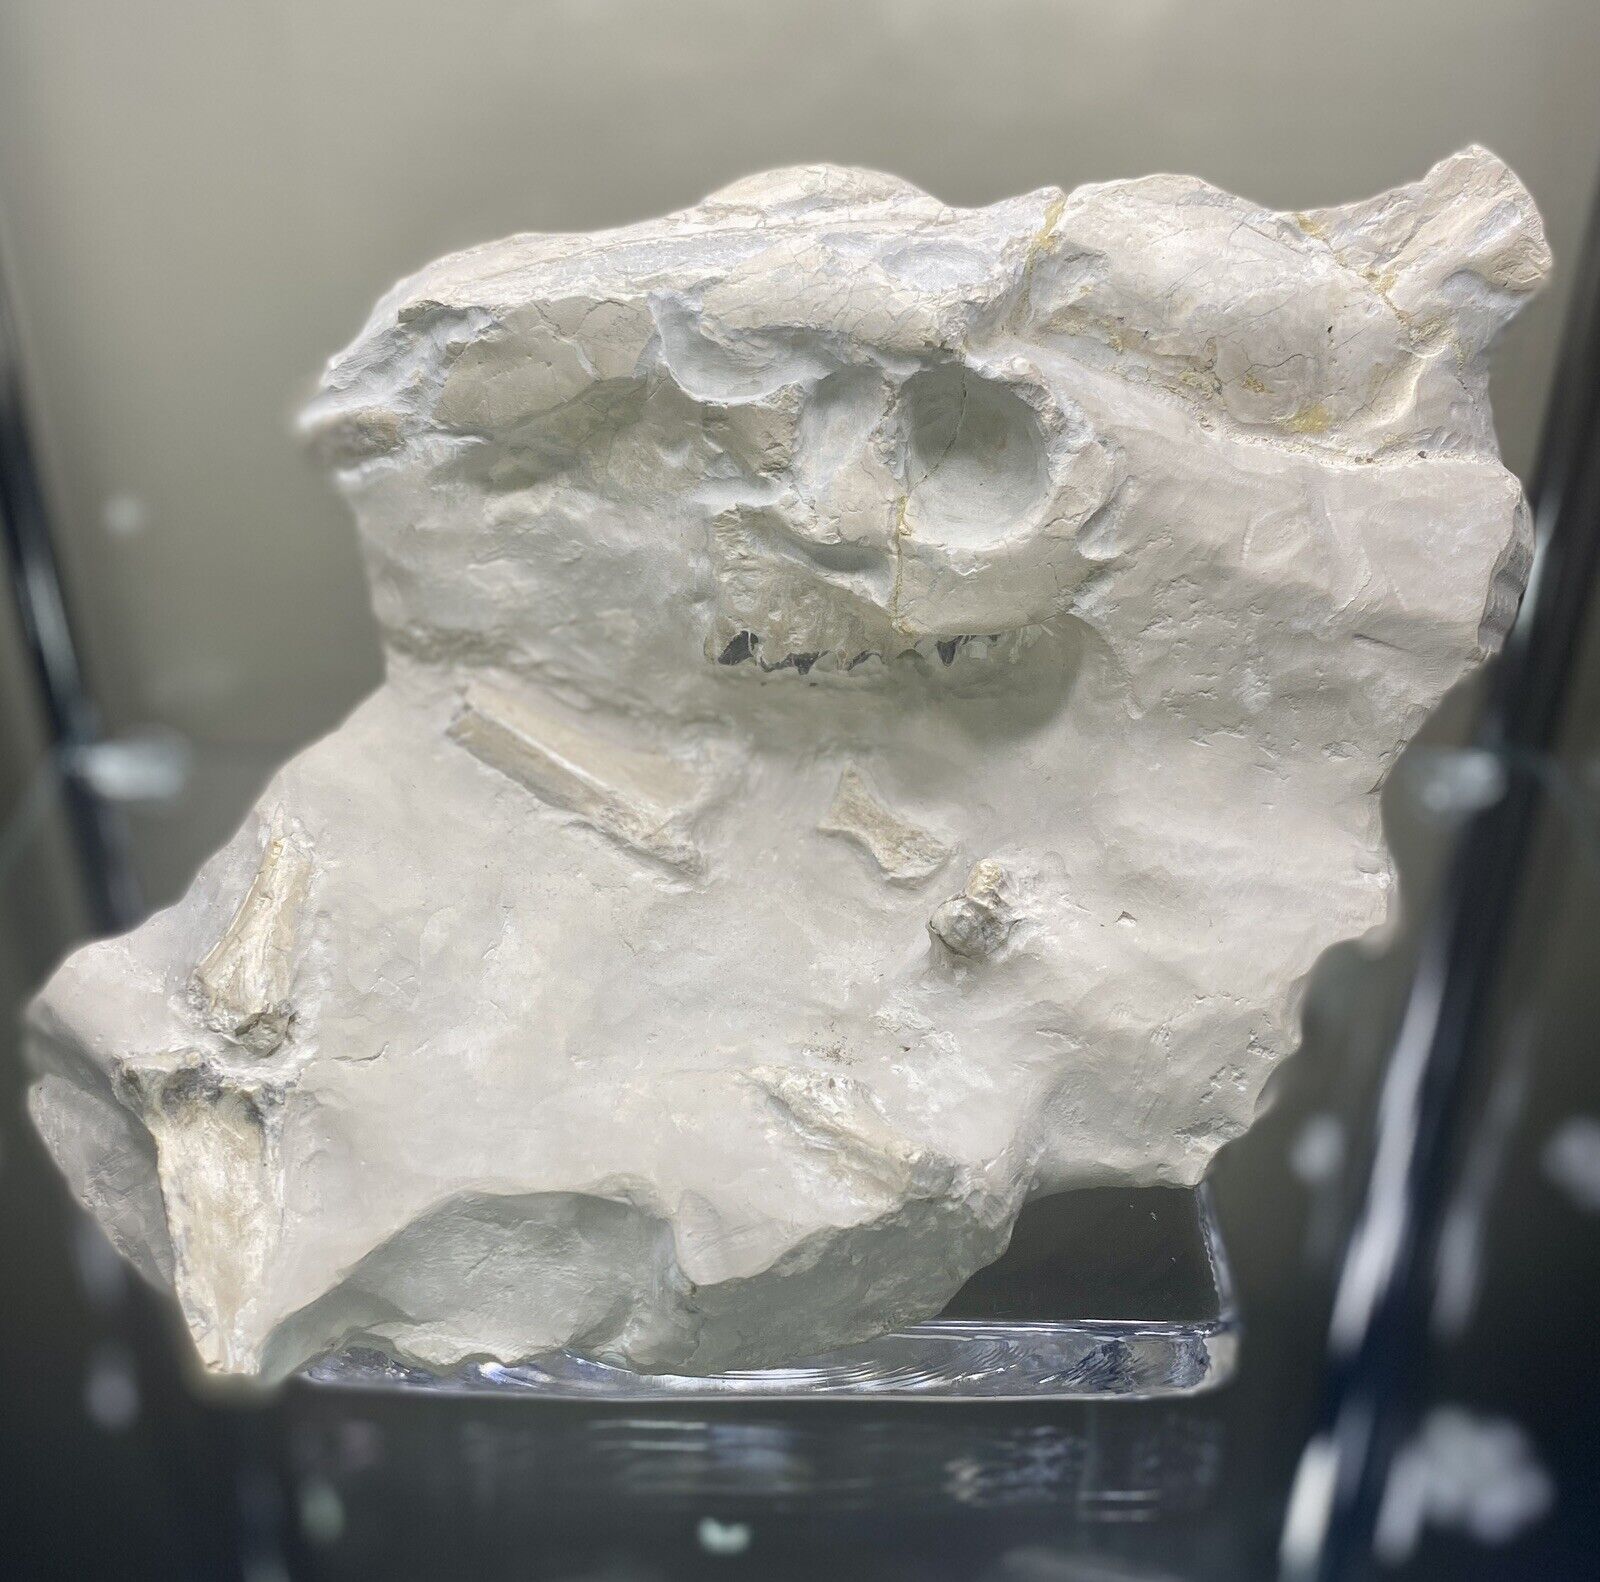 Large Oreodont Fossil Skull and Bone in Matrix from White River Formation